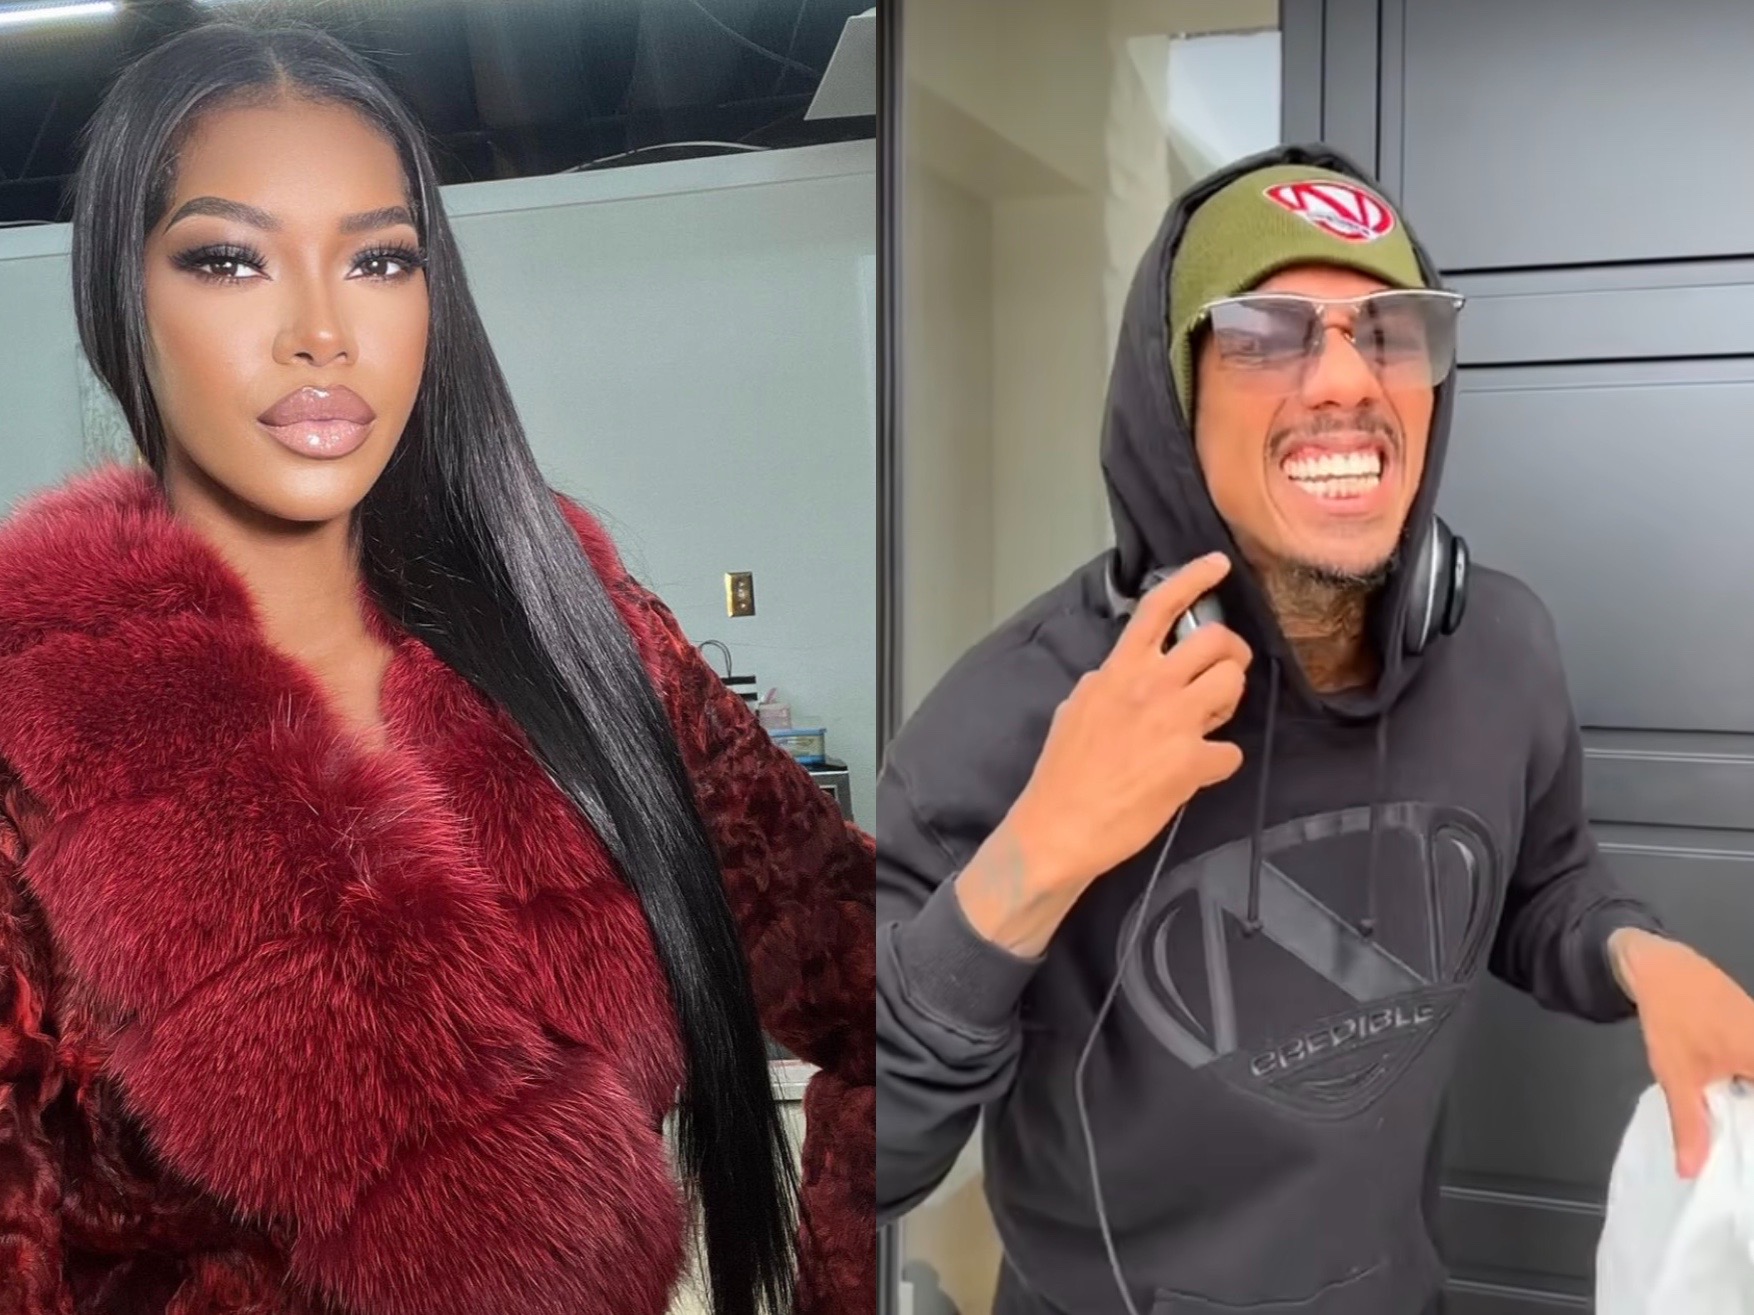 Fans Warn Jessica White to be Careful After She Uploaded a Photo of Herself Supporting Ex-Boyfriend Nick Cannon